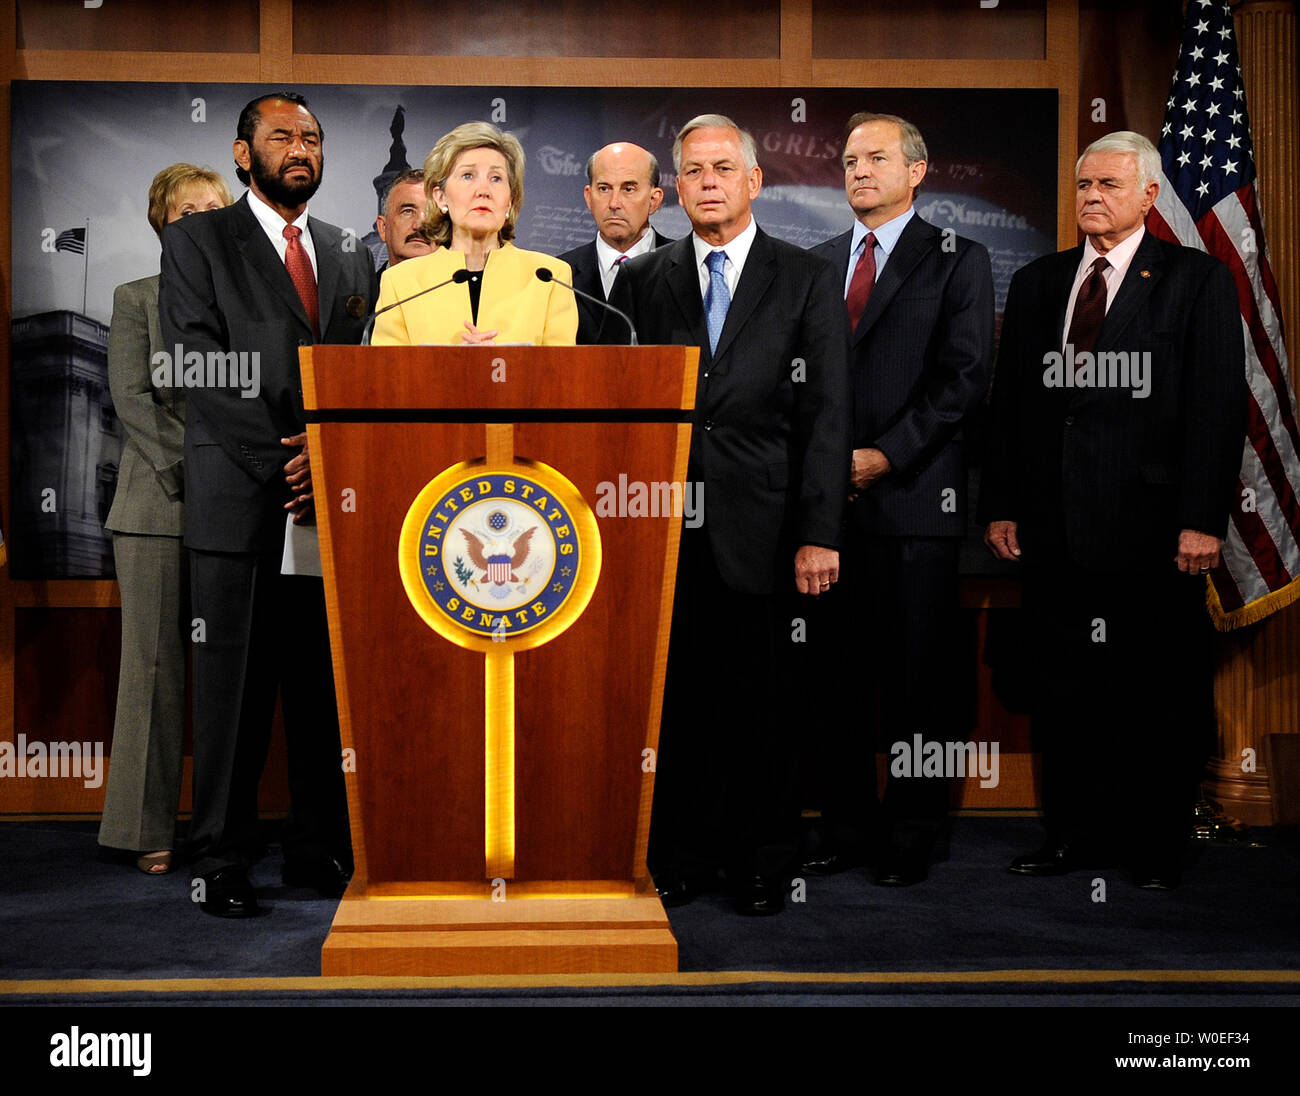 Sen. Kay Bailey Hutchison (R-TX), accompanied by members of the Texas Congressional delegation, speaks during a news conference on the impact of Hurricane Ike on Texas in Washington on September 16, 2008. Hutchinson was joined by, from left to right, Rep. Kay Granger (R-TX) Rep. Al Green (D-TX), Rep. Ciro Rodriguez (D-TX), Rep. Louis Gohmet (R-TX), Rep. Gene Green (D-TX), Rep. Chet Edwards (D-TX) and Rep. John Carter (R-TX). (UPI Photo/Kevin Dietsch) Stock Photo